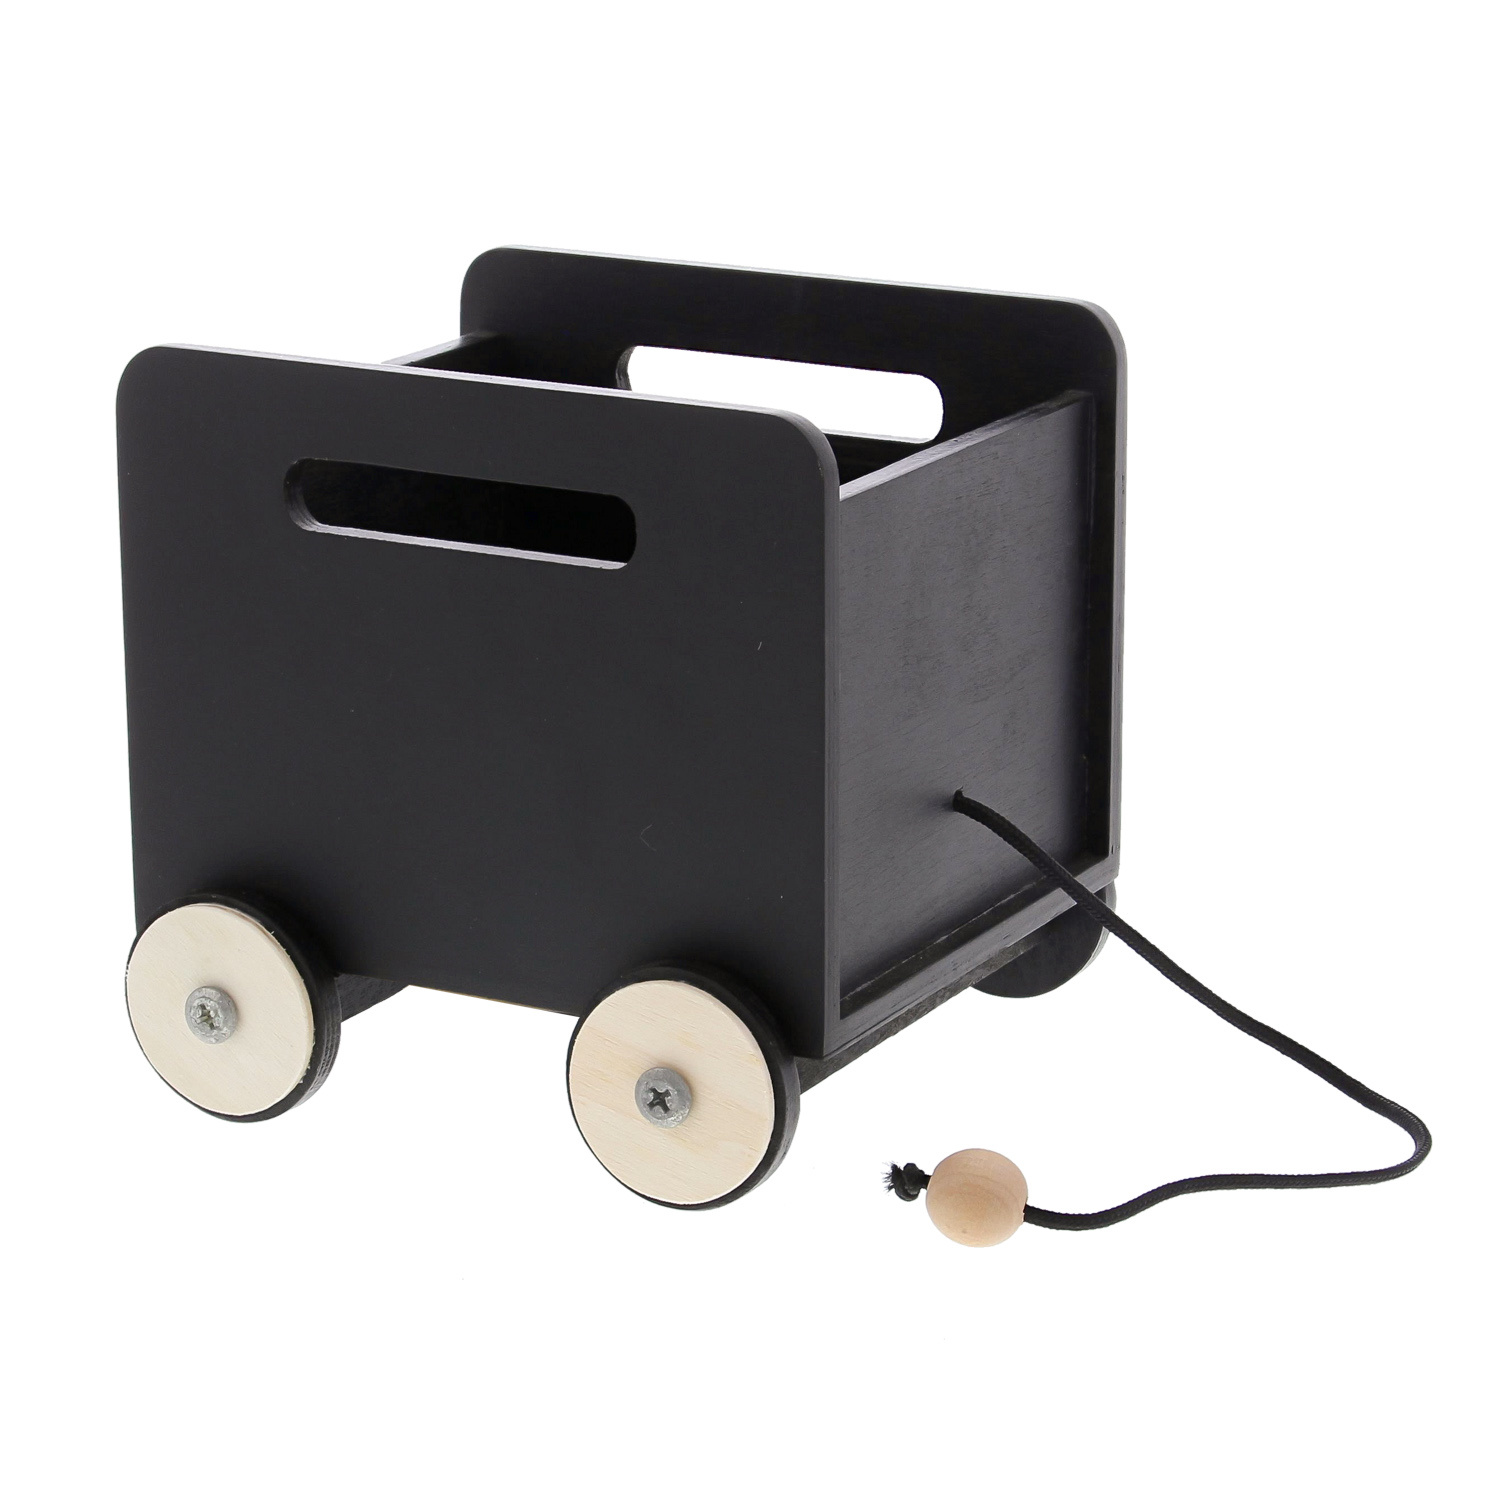 Tray on wheels with black chalkboard - 165*140*160 mm - 2 pieces